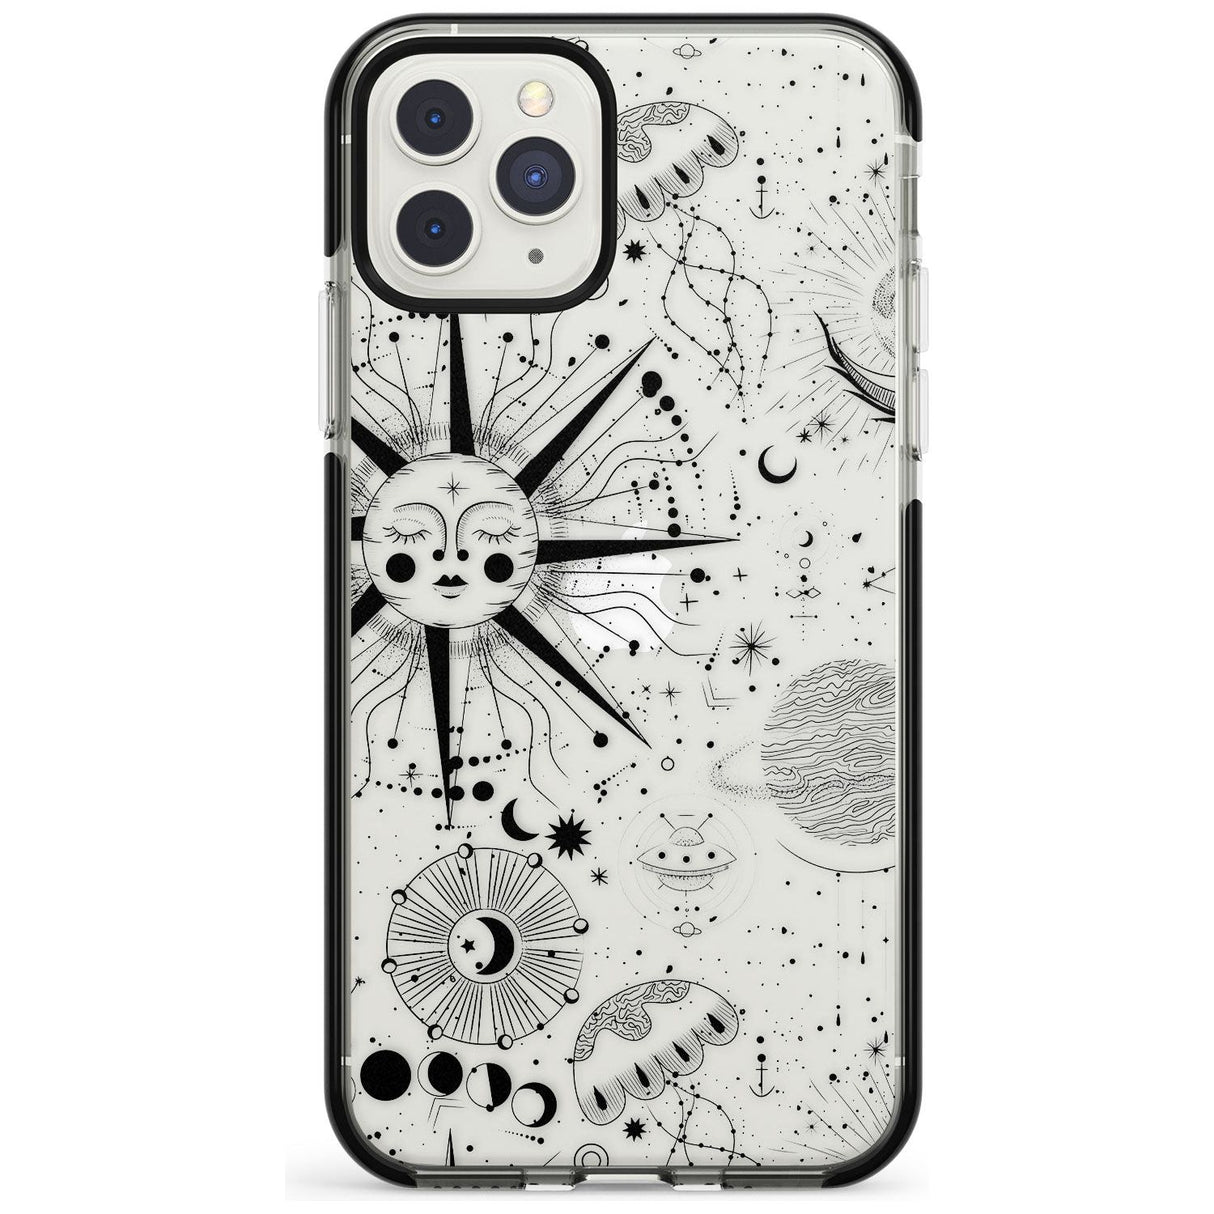 Large Sun Vintage Astrological Black Impact Phone Case for iPhone 11 Pro Max